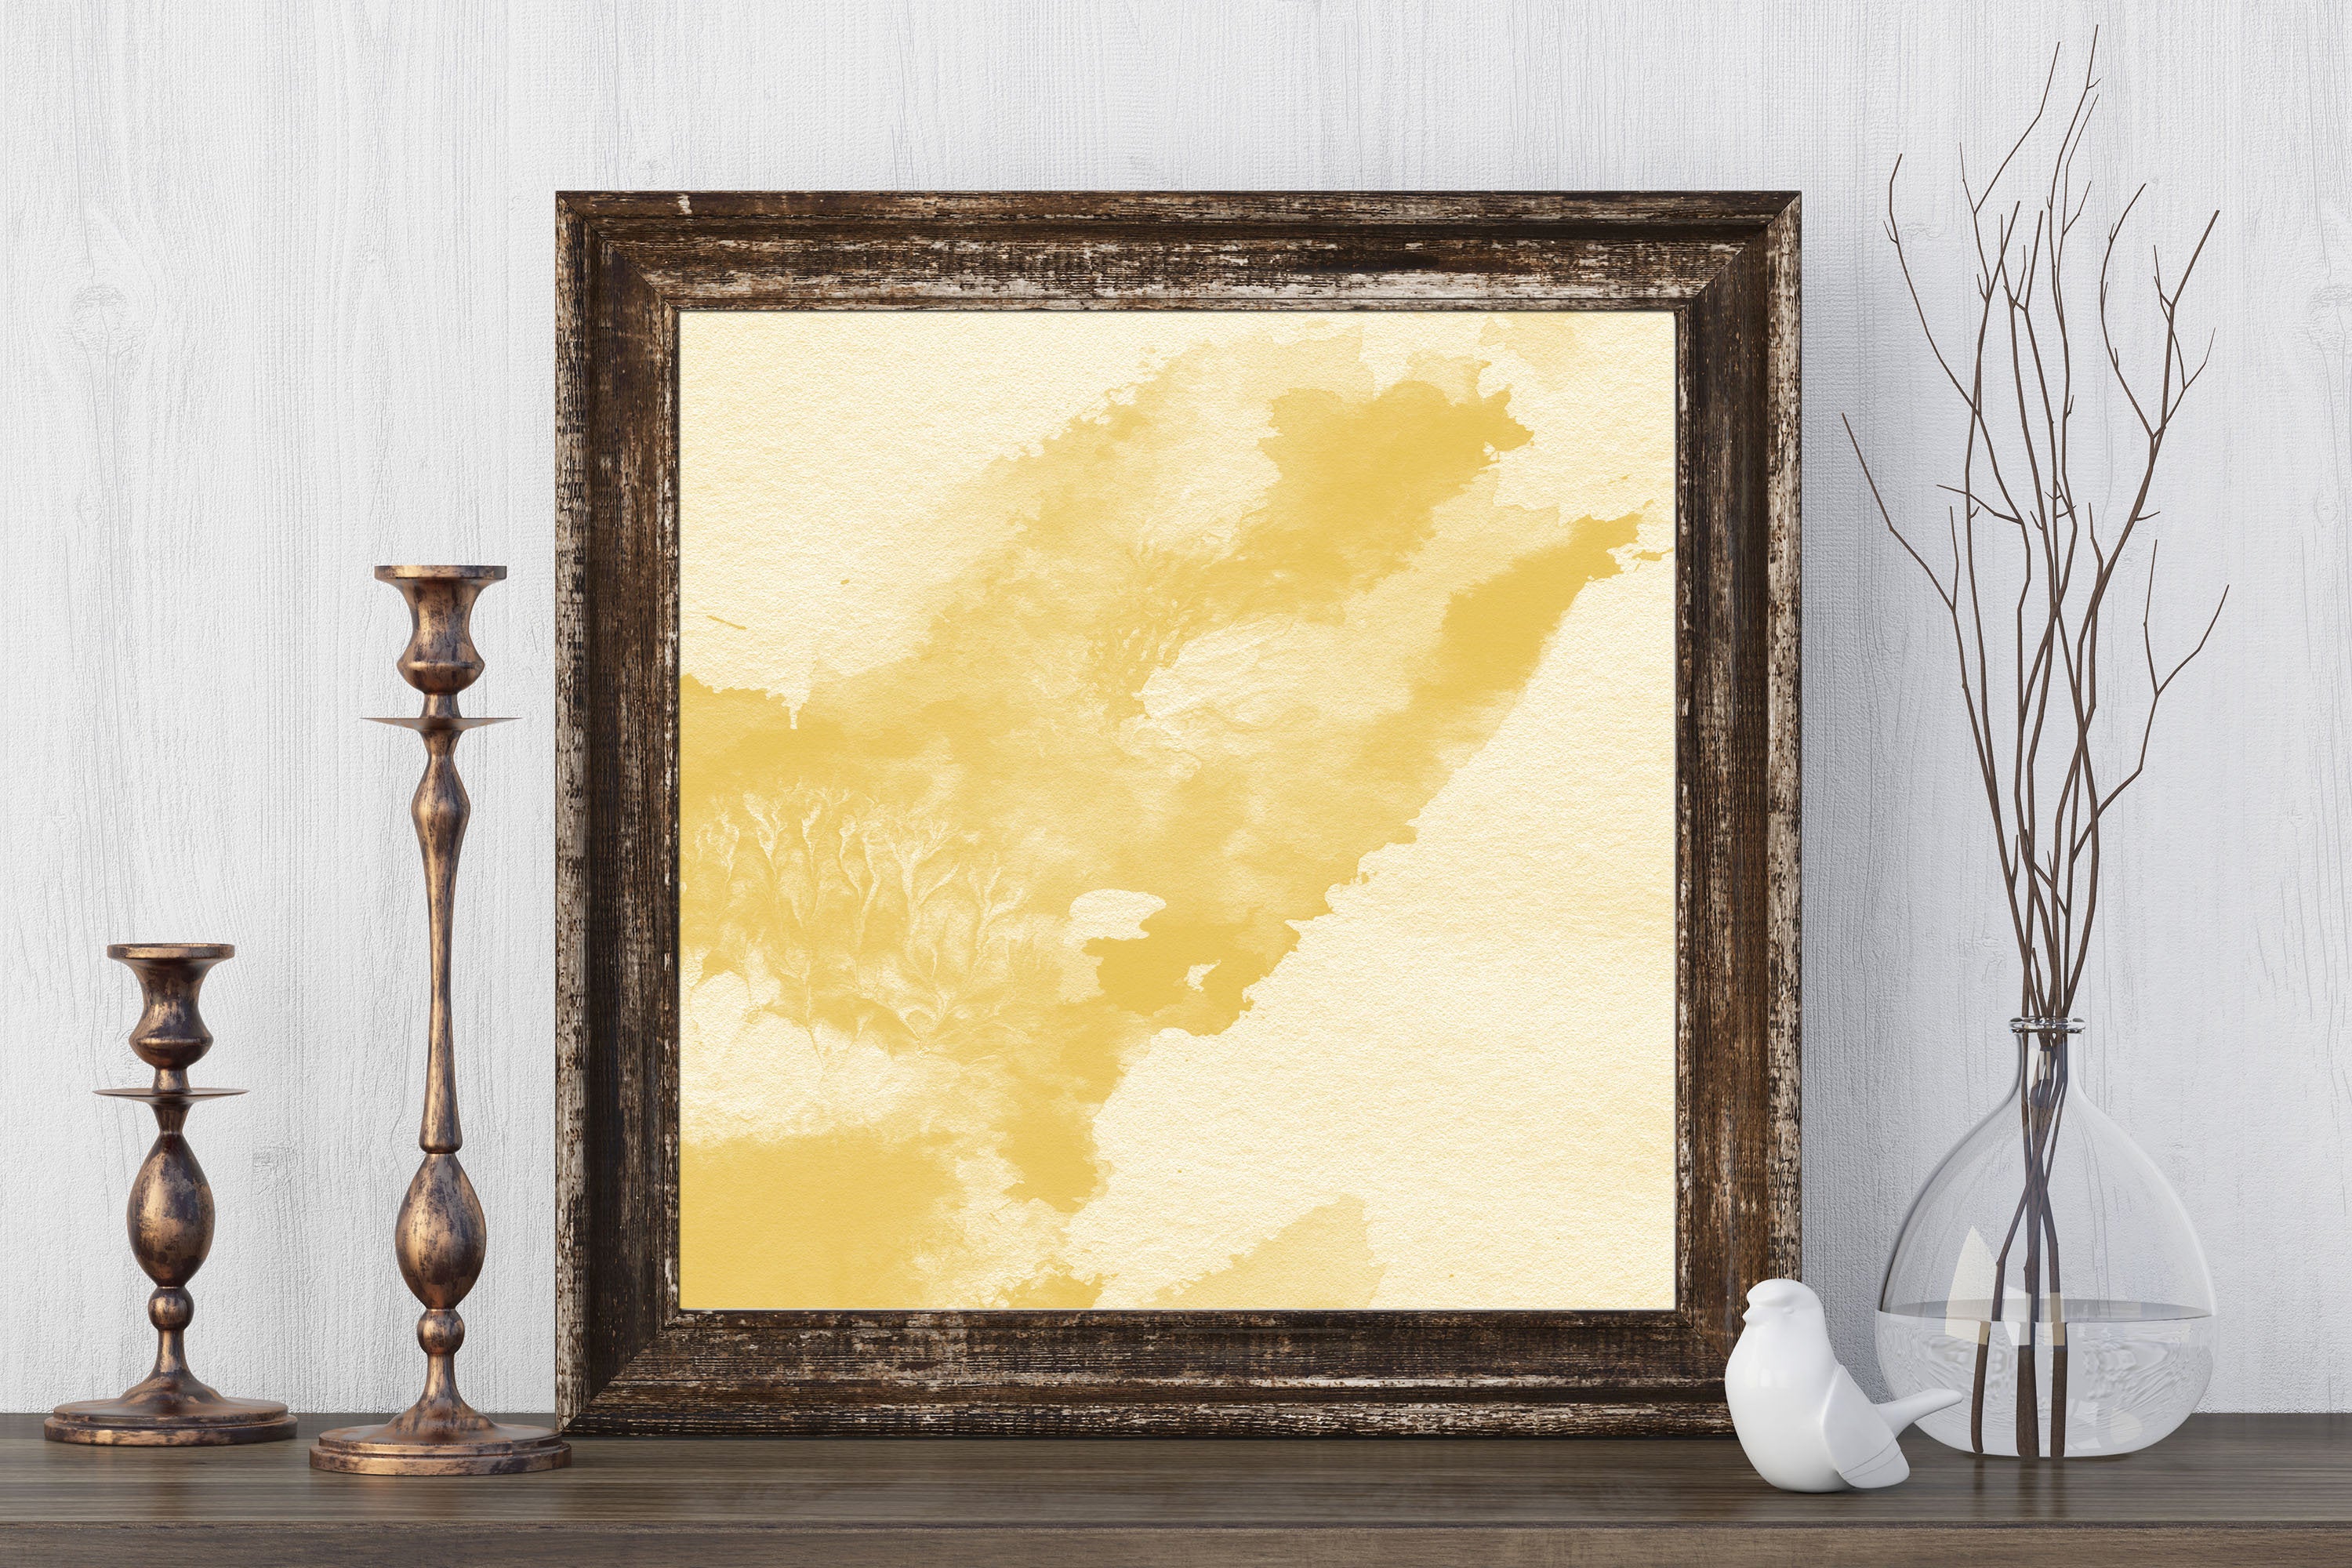 30 Ombre Gold Watercolor Digital Papers 12x12in 300 Dpi Instant Download Commercial Use Scrapbook Luxury Gold Paint Brush Stroke Shabby Chic